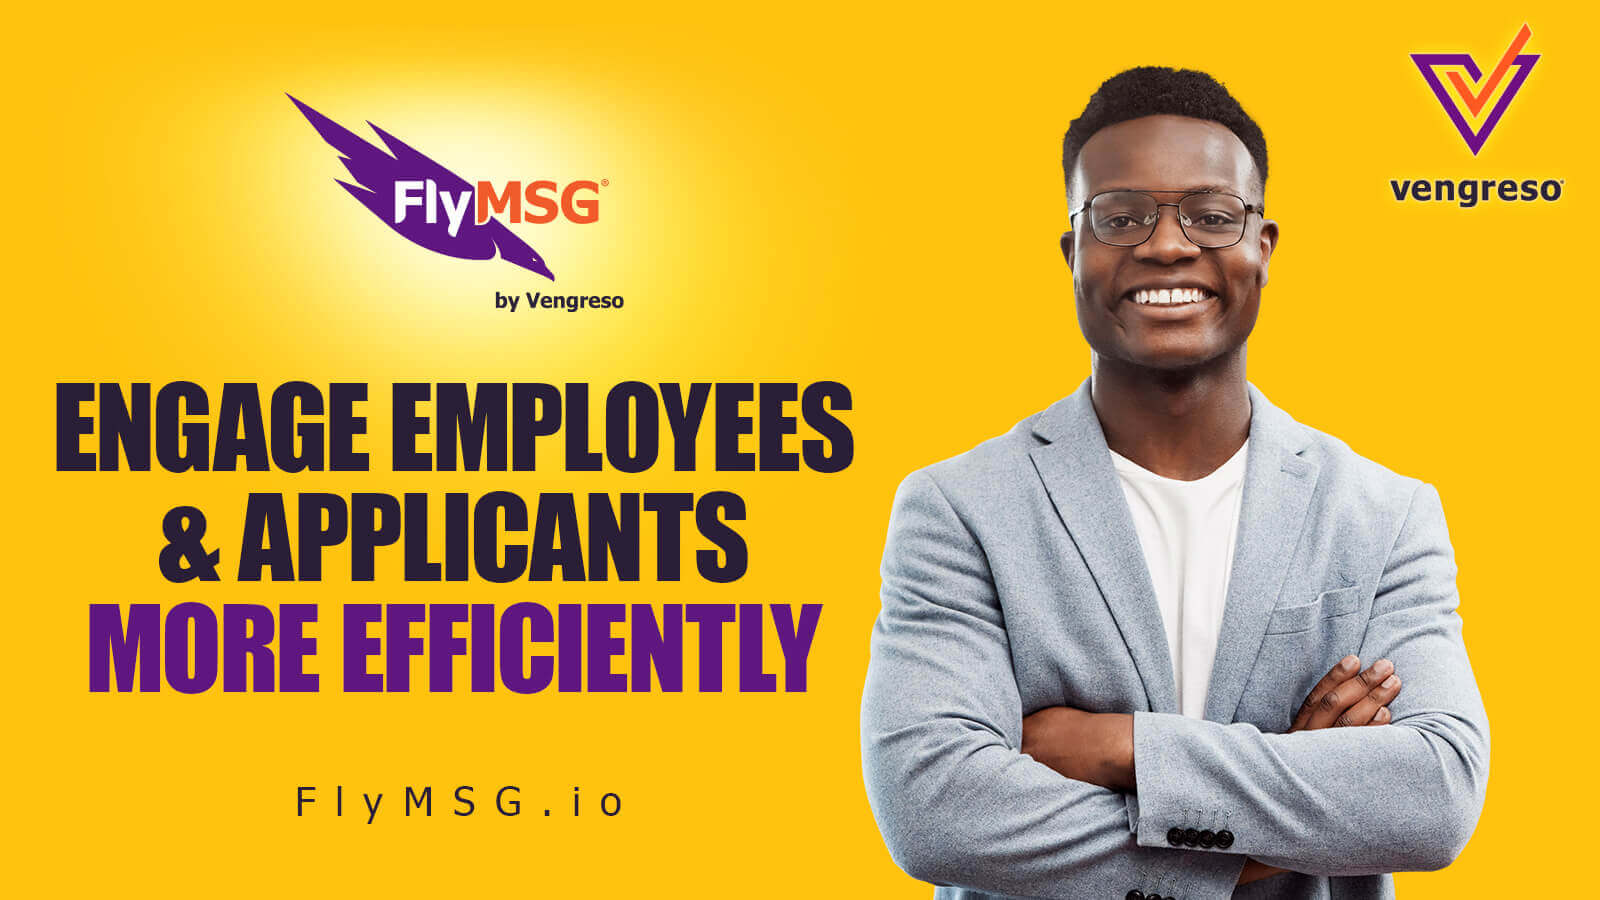 FlyMSG for Human Resources & Recruiters ENGAGE EMPLOYEES & APPLICANTS MORE EFFICIENTLY.